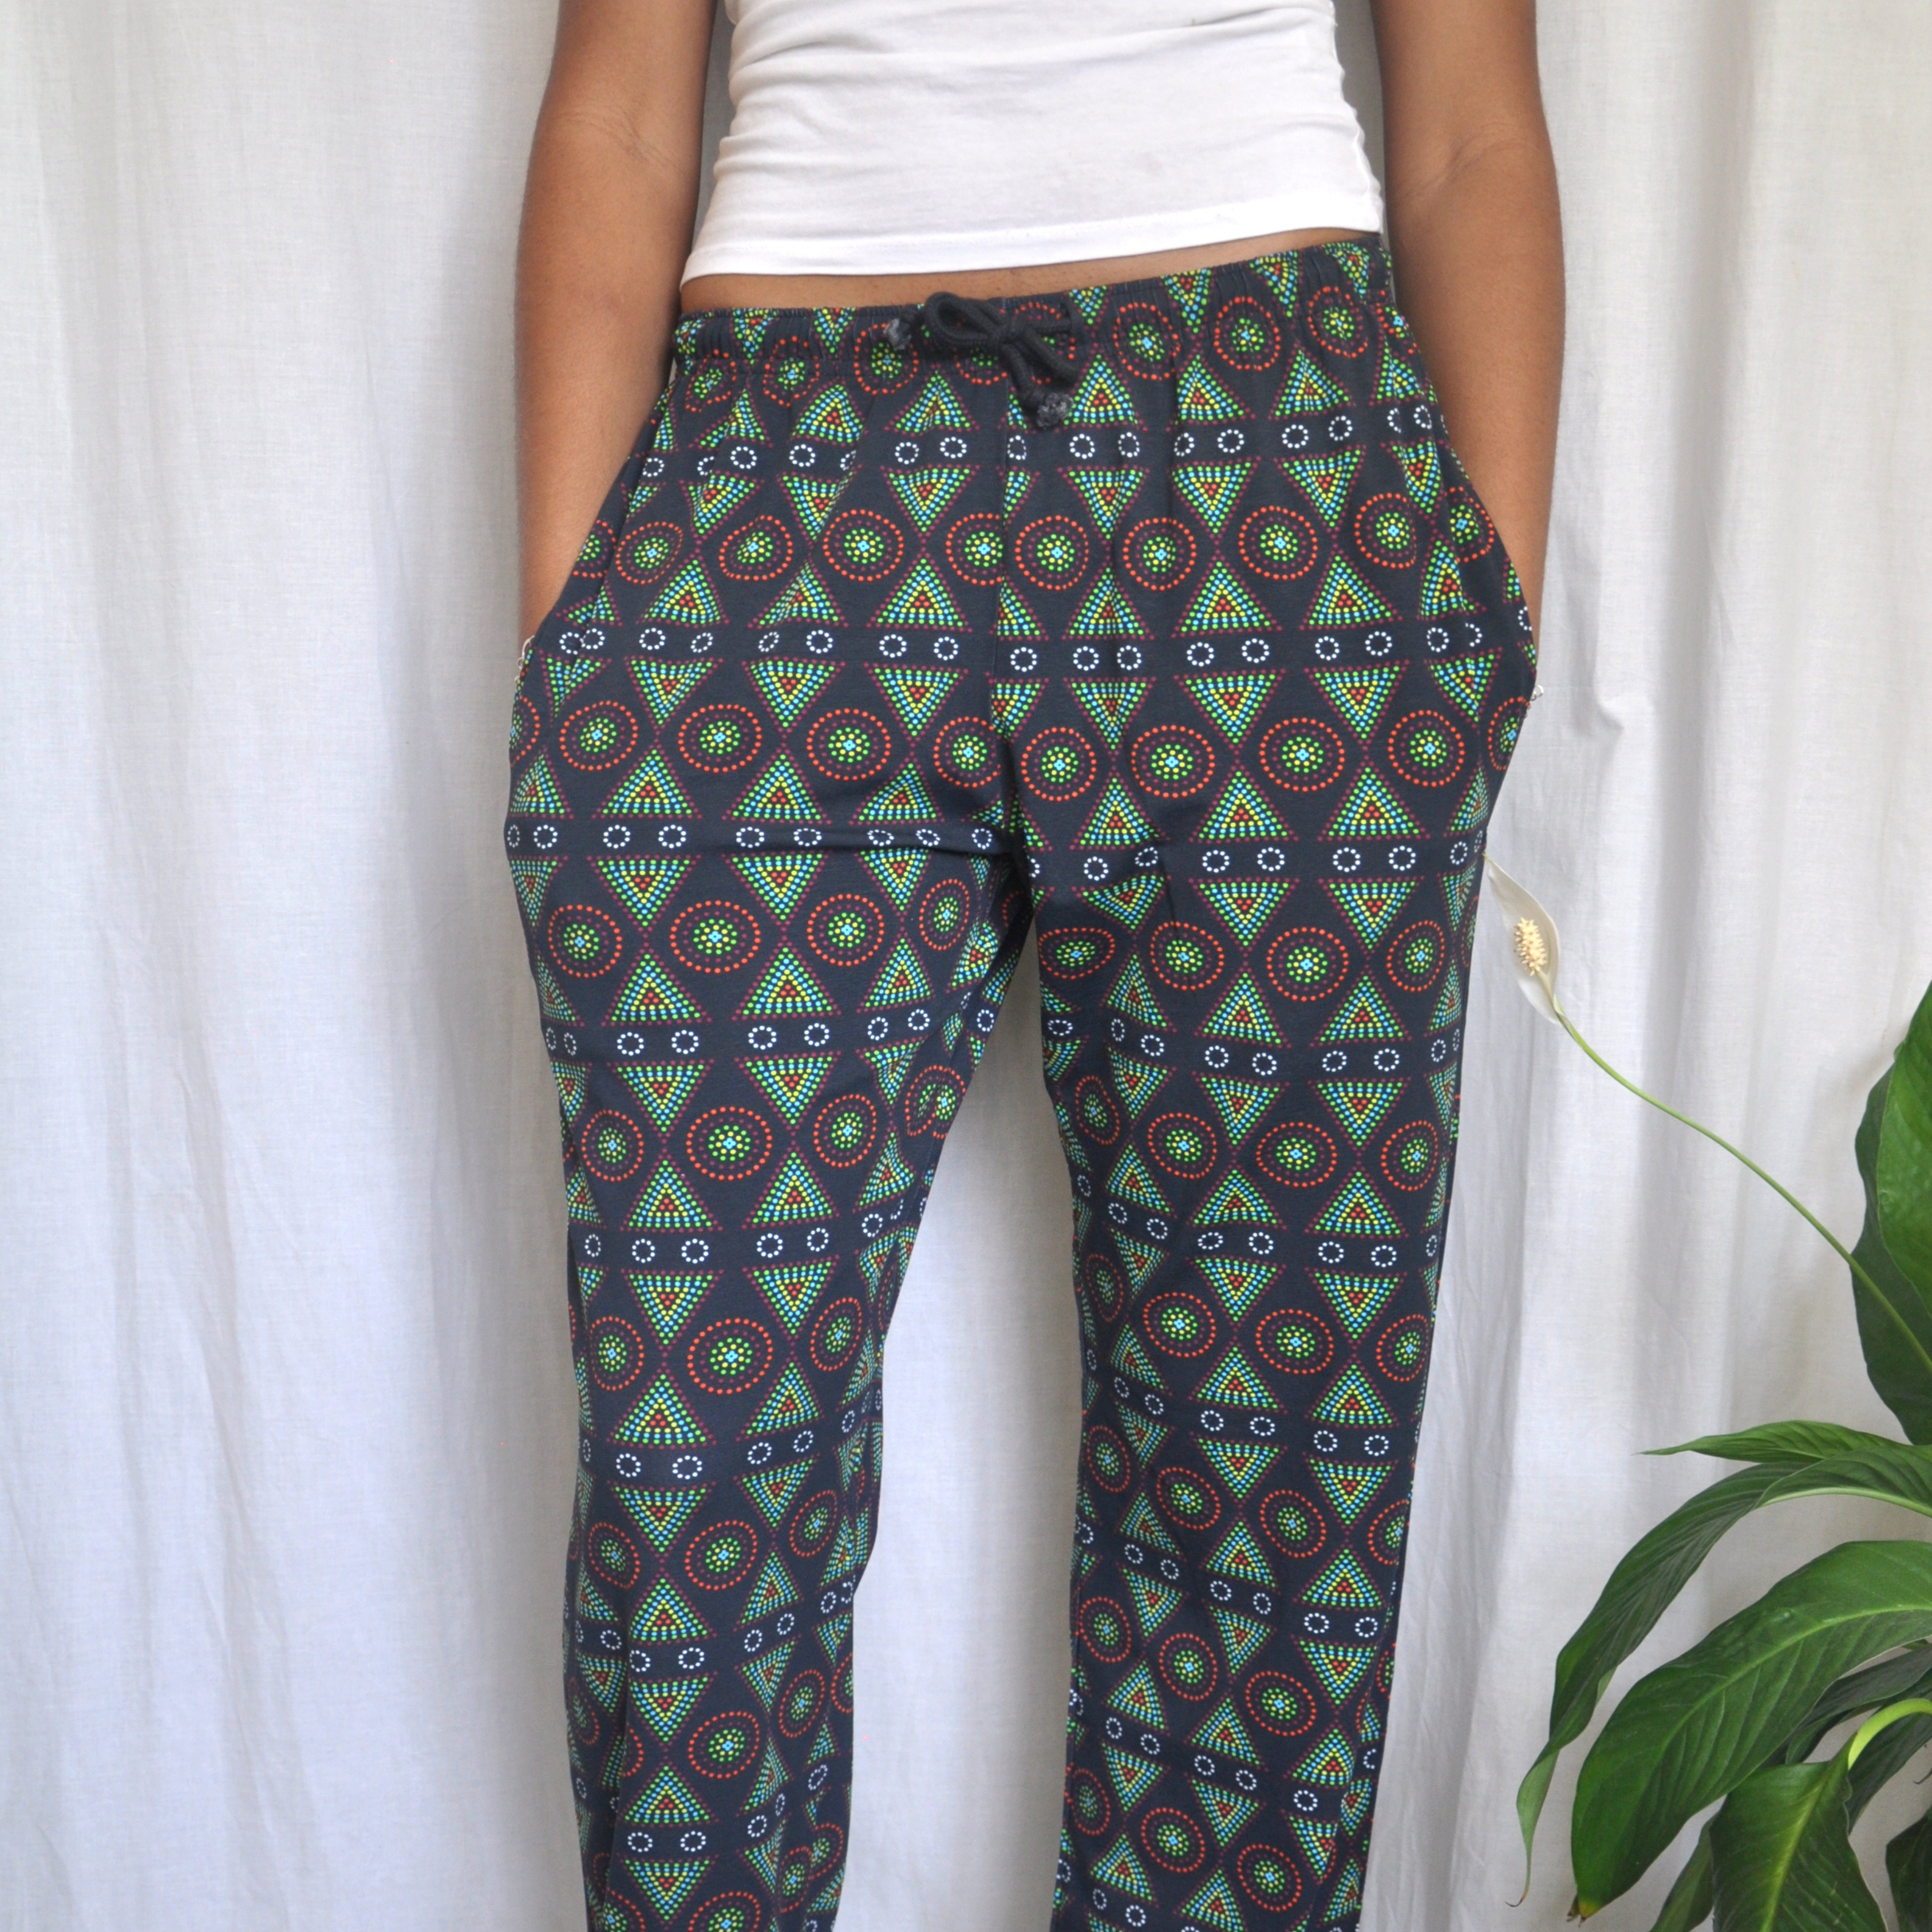 A person is wearing black patterned pyjama bottoms with colorful circular designs and a white shirt. They have their hands in their pockets. The background is a white curtain, and there is a green potted plant on the right side.